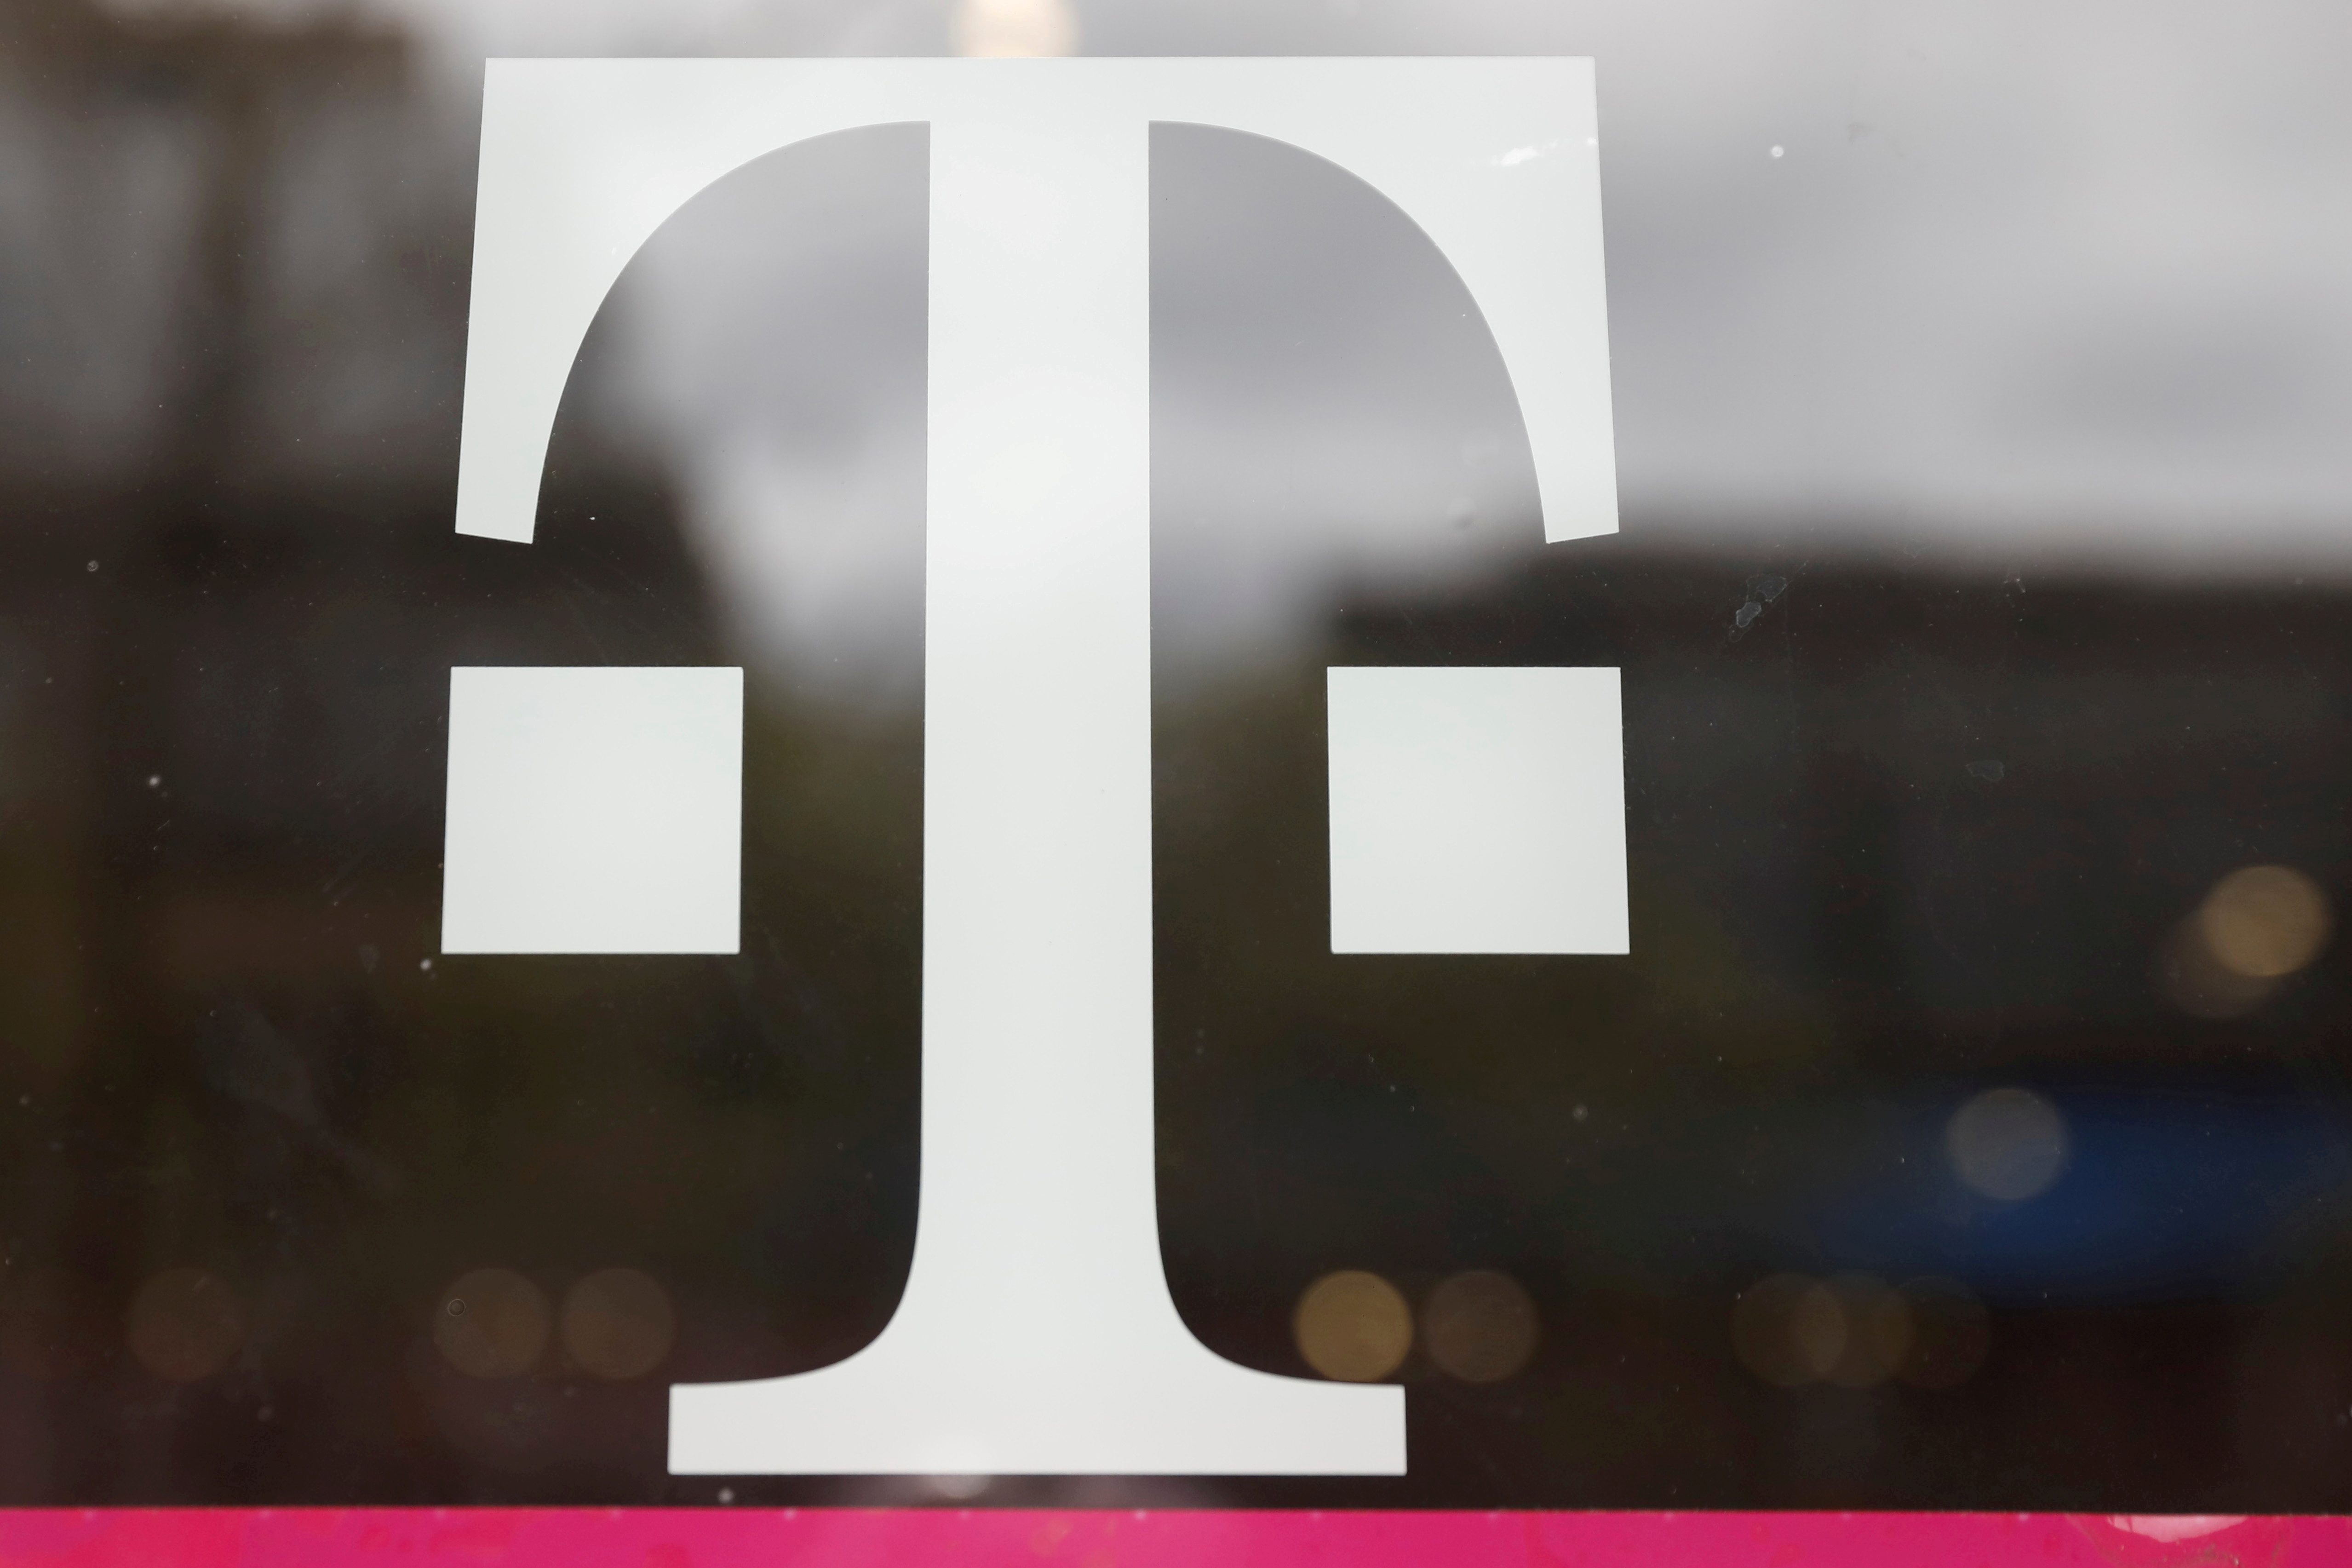 Polish TMobile unit faces cyber attack, systems not compromised Reuters